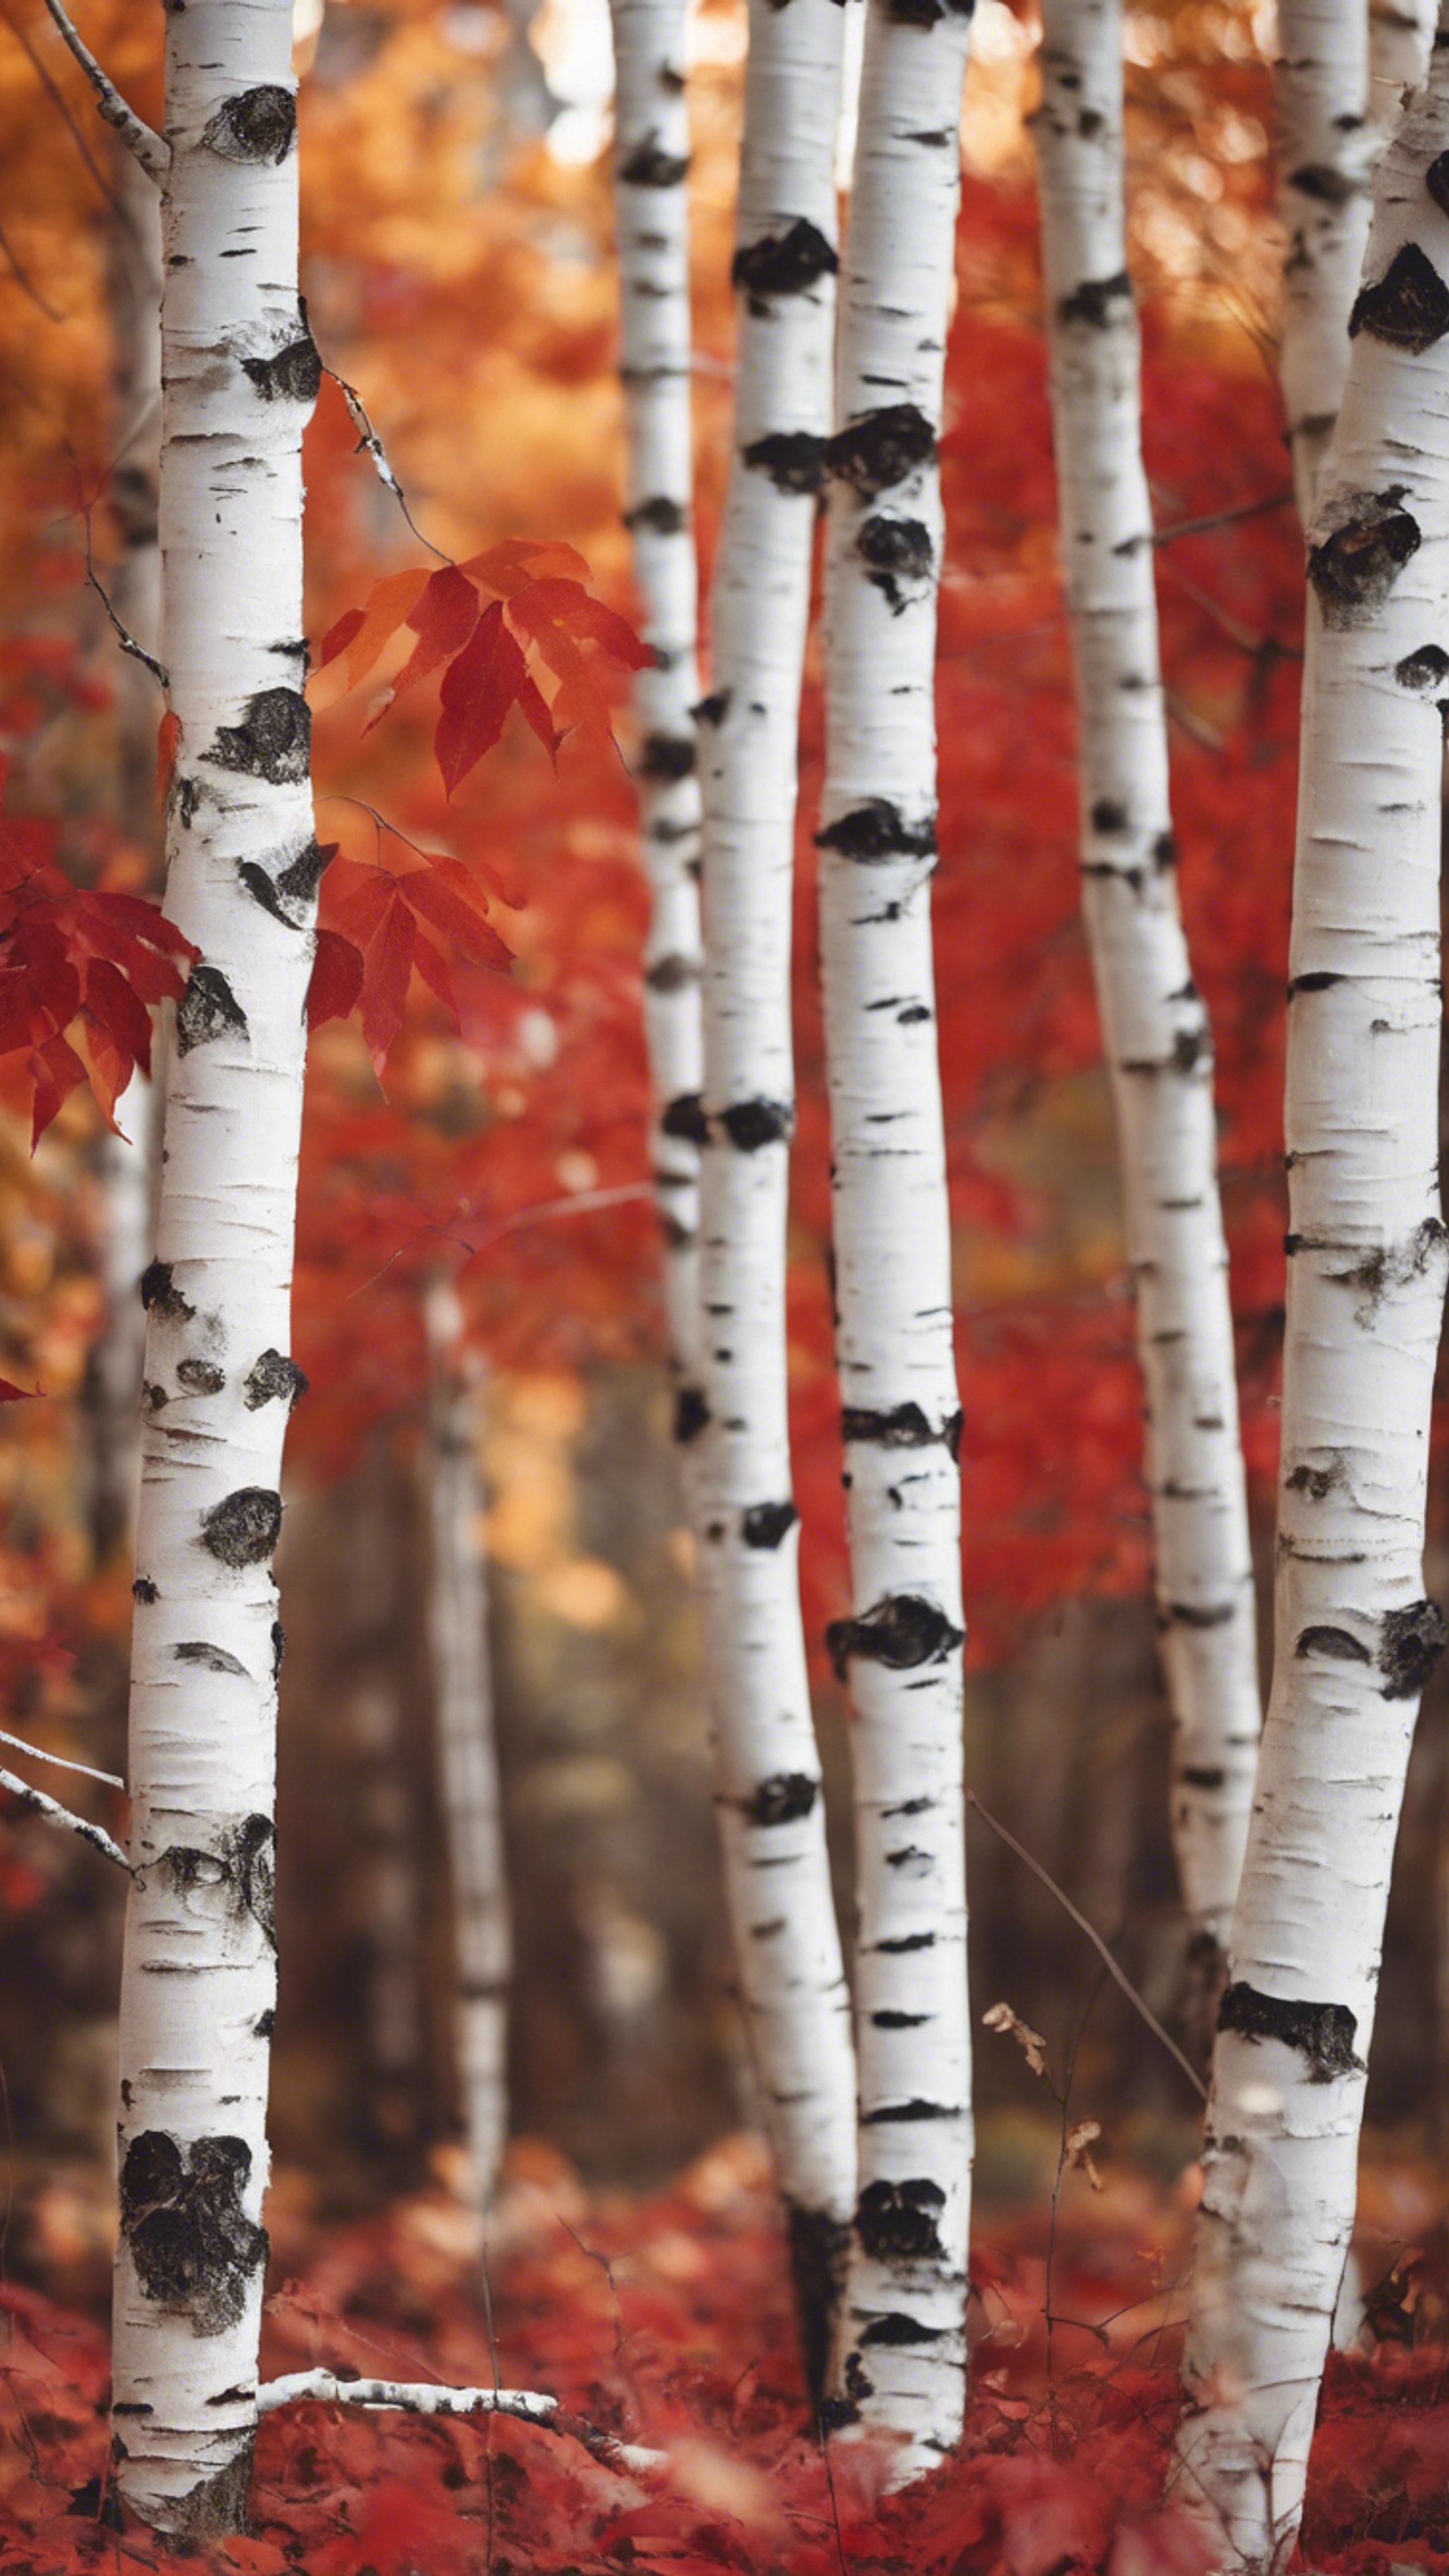 Fall scenes with white birches decked with autumn red foliage. Тапет[2b263cdc55c54552b5f9]